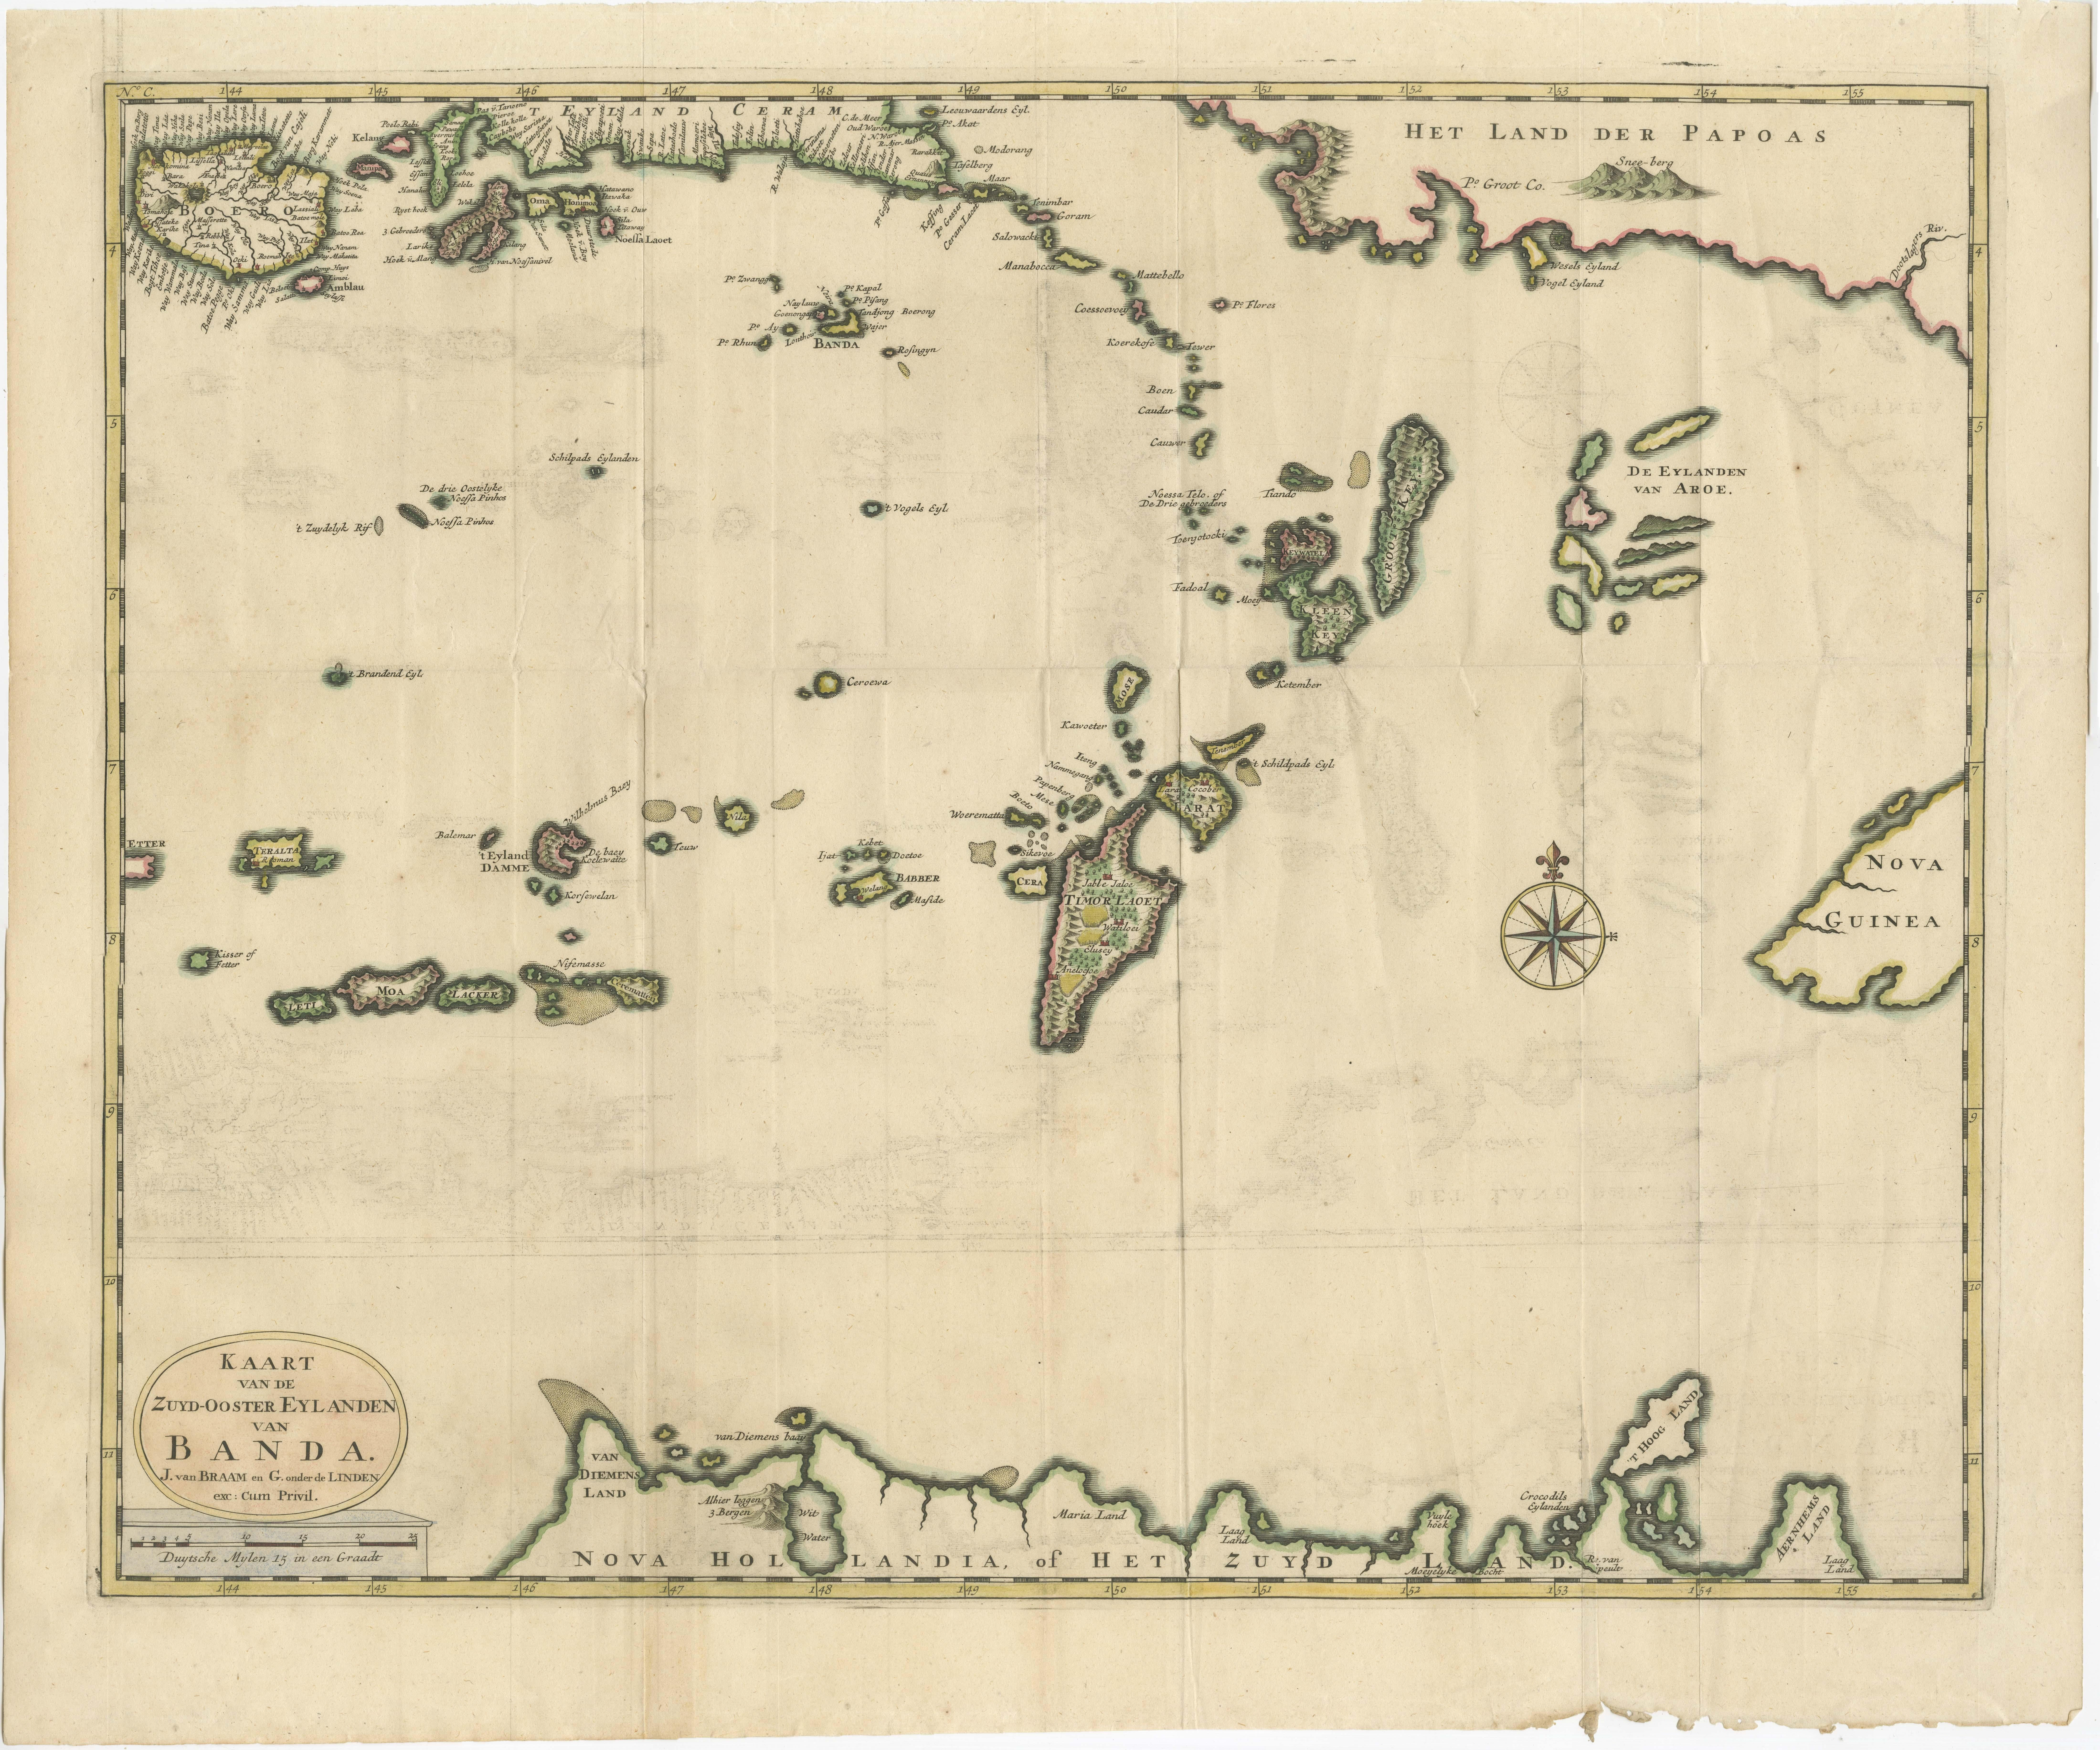 Original antique map titled 'Kaart van de Zuyd-Ooster Eylanden van Banda'. Important map of the seas and islands surrounding the Banda Islands, Indonesia, extending south to northern Australia, east to Papua New Guinea and north to Ceram. Published